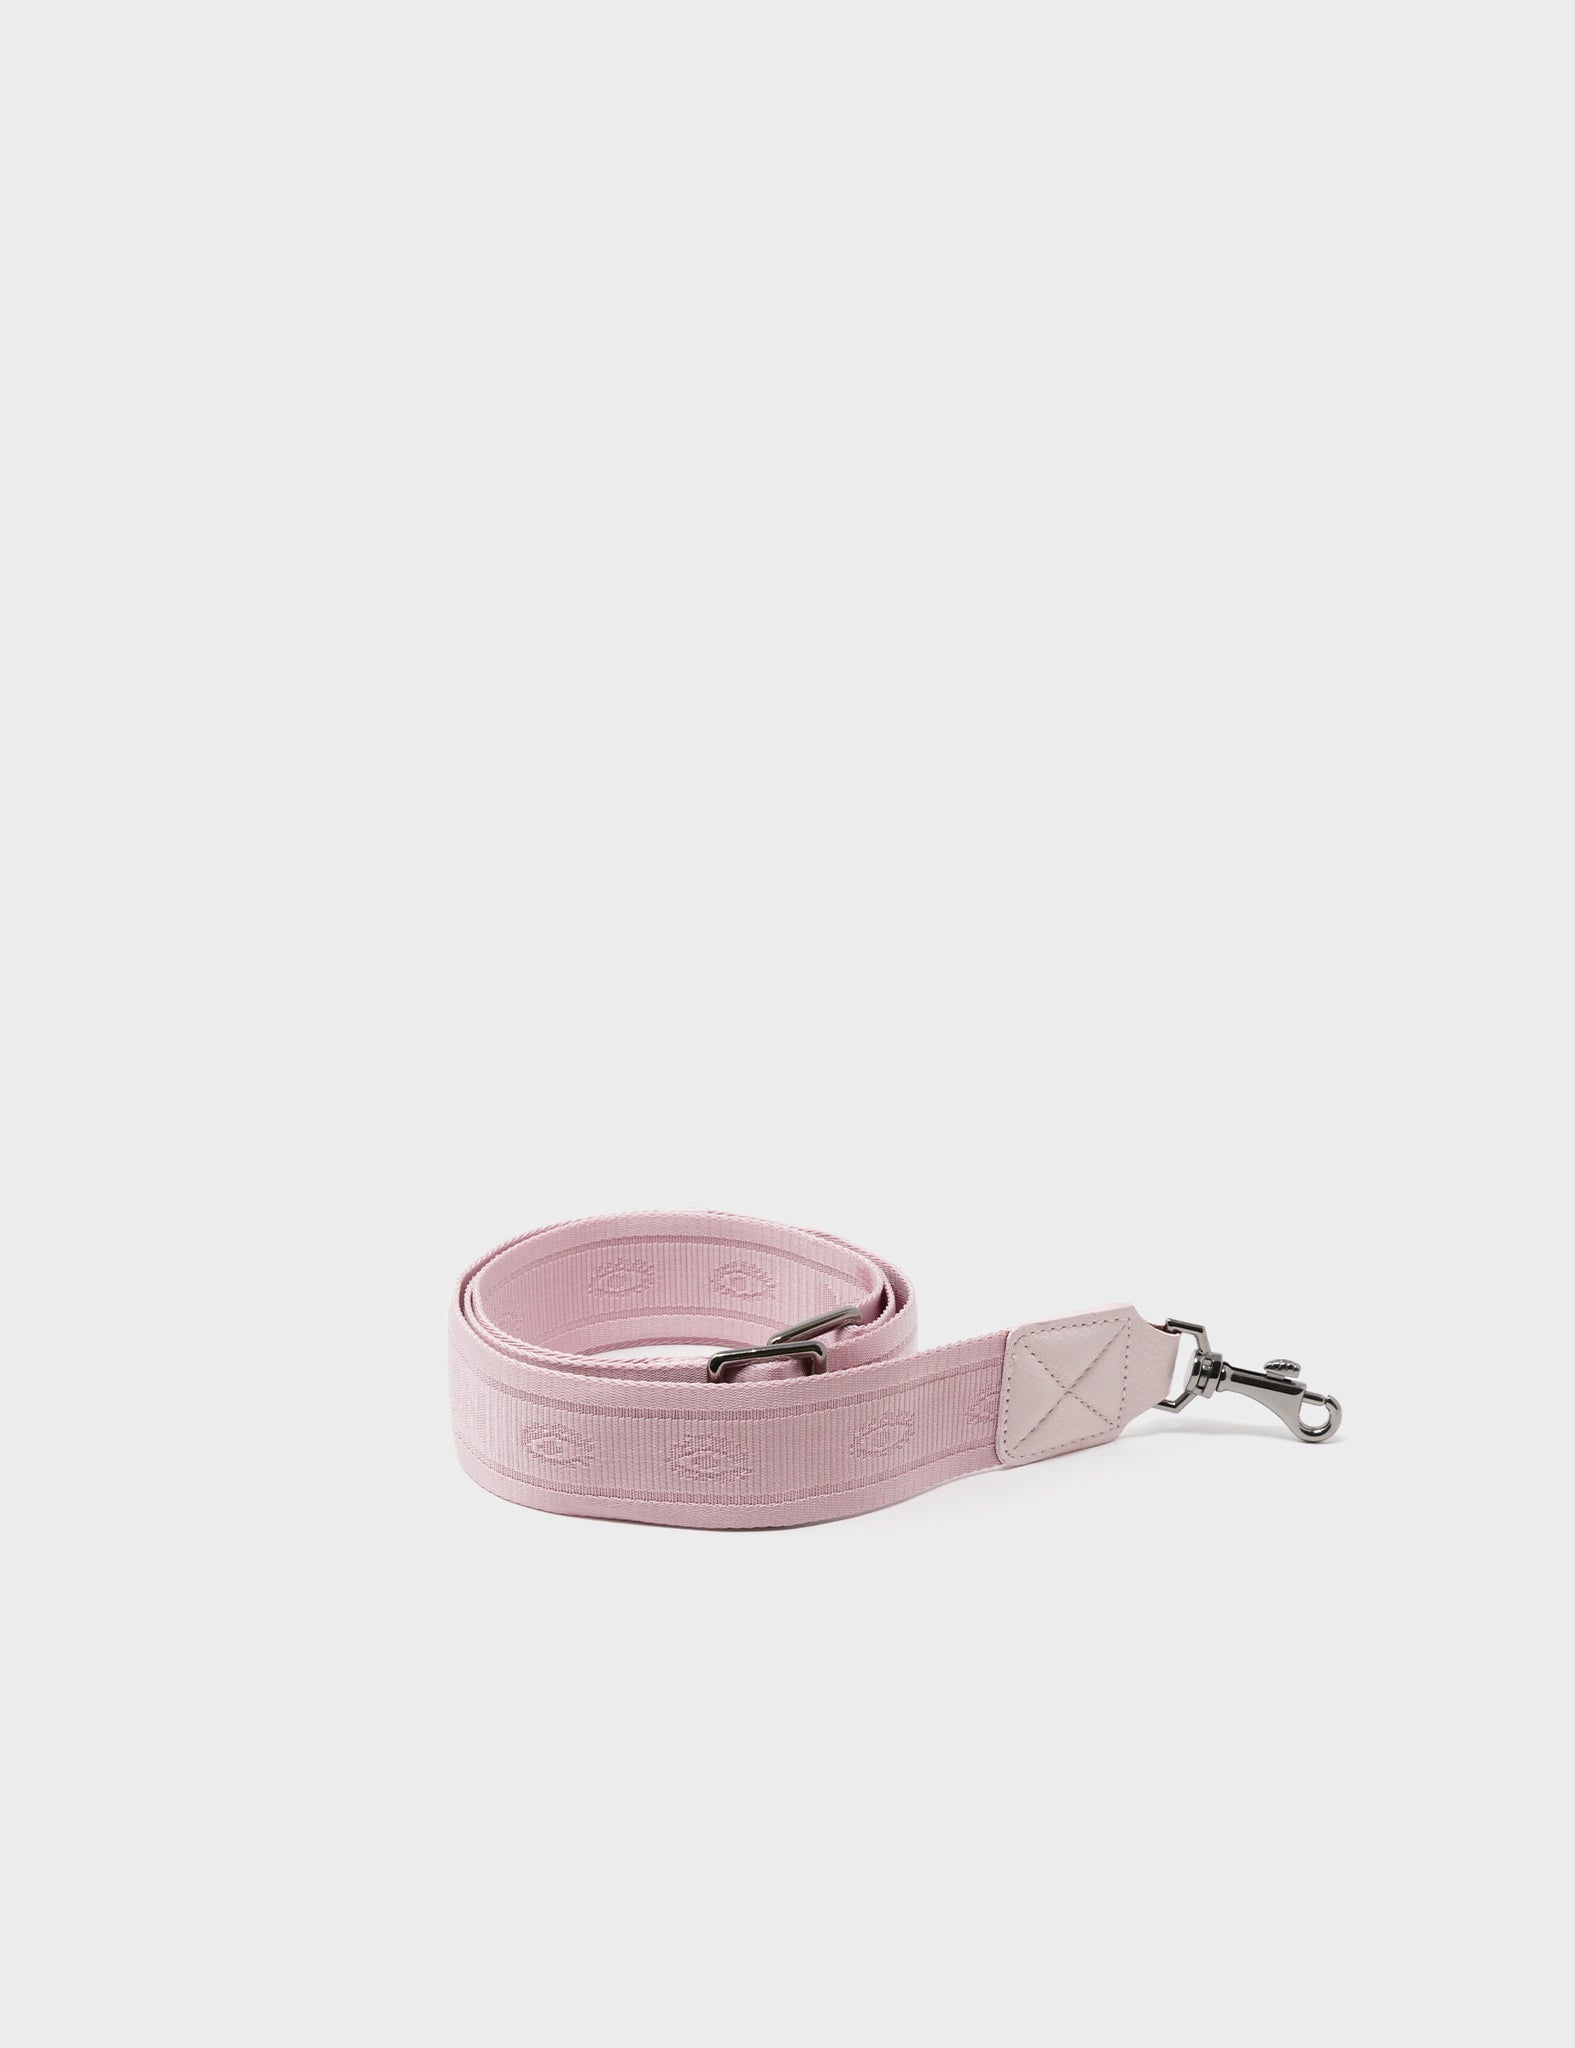 Detachable Crossbody Powder Pink Leather and Nylon Strap Eyes Design - front